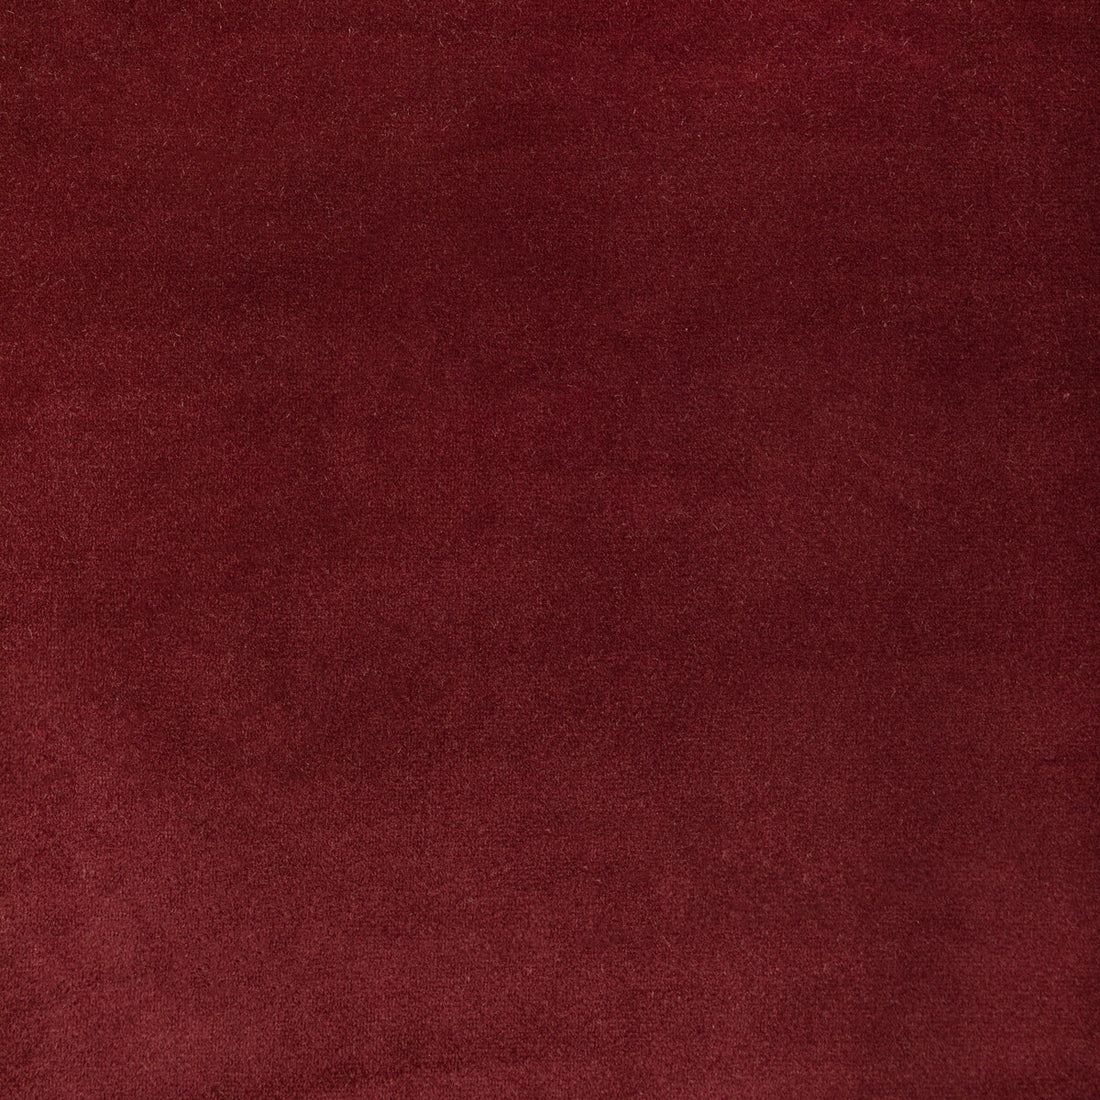 Rocco Velvet fabric in currant color - pattern KW-10065.3685MG41.0 - by Kravet Contract